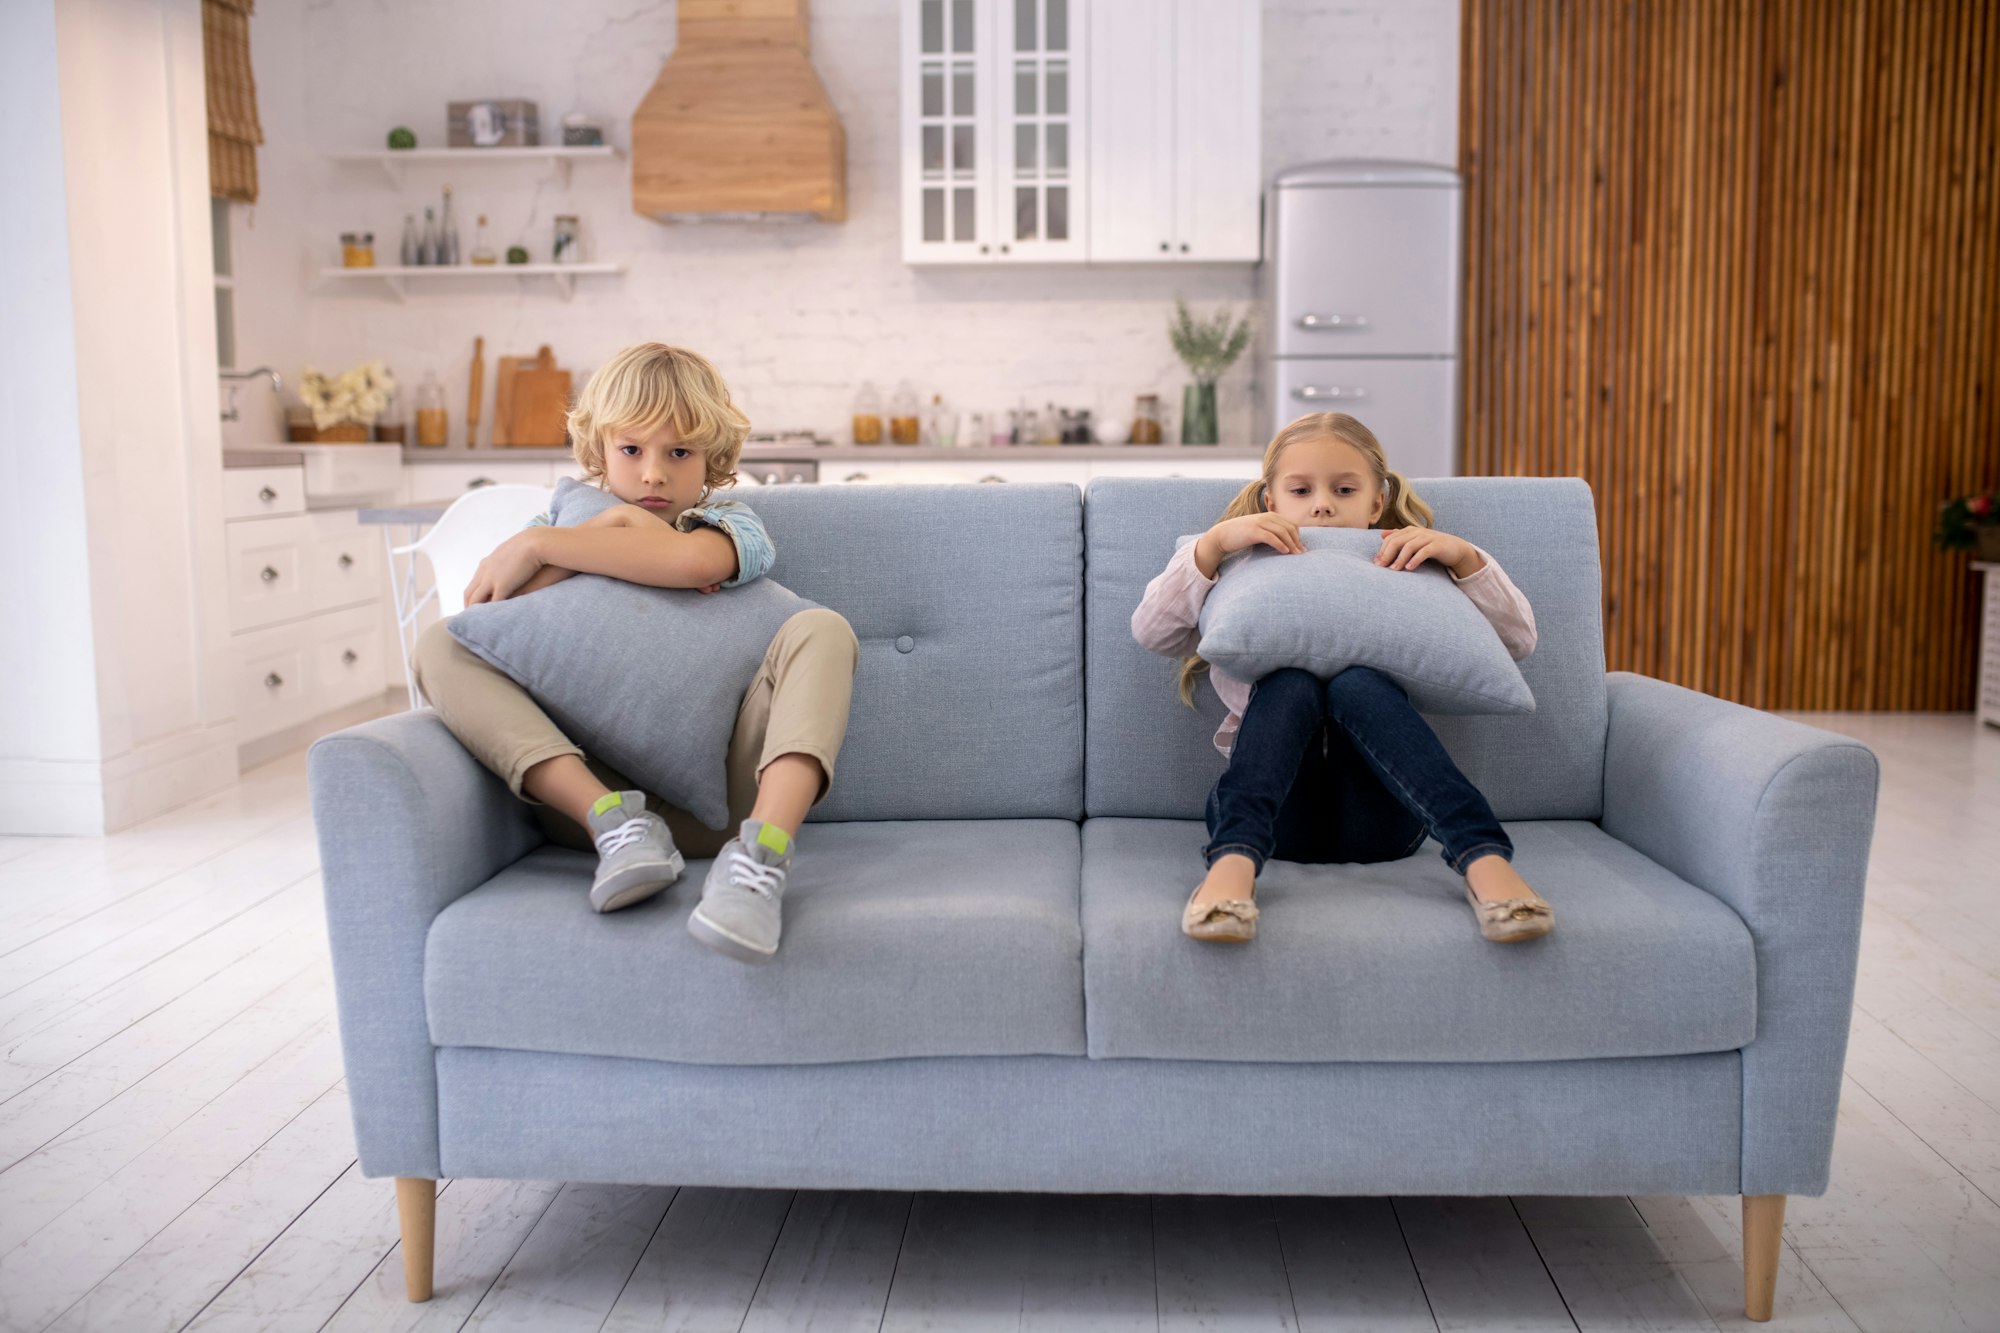 Blond kids sitting on the sofa and looking angry